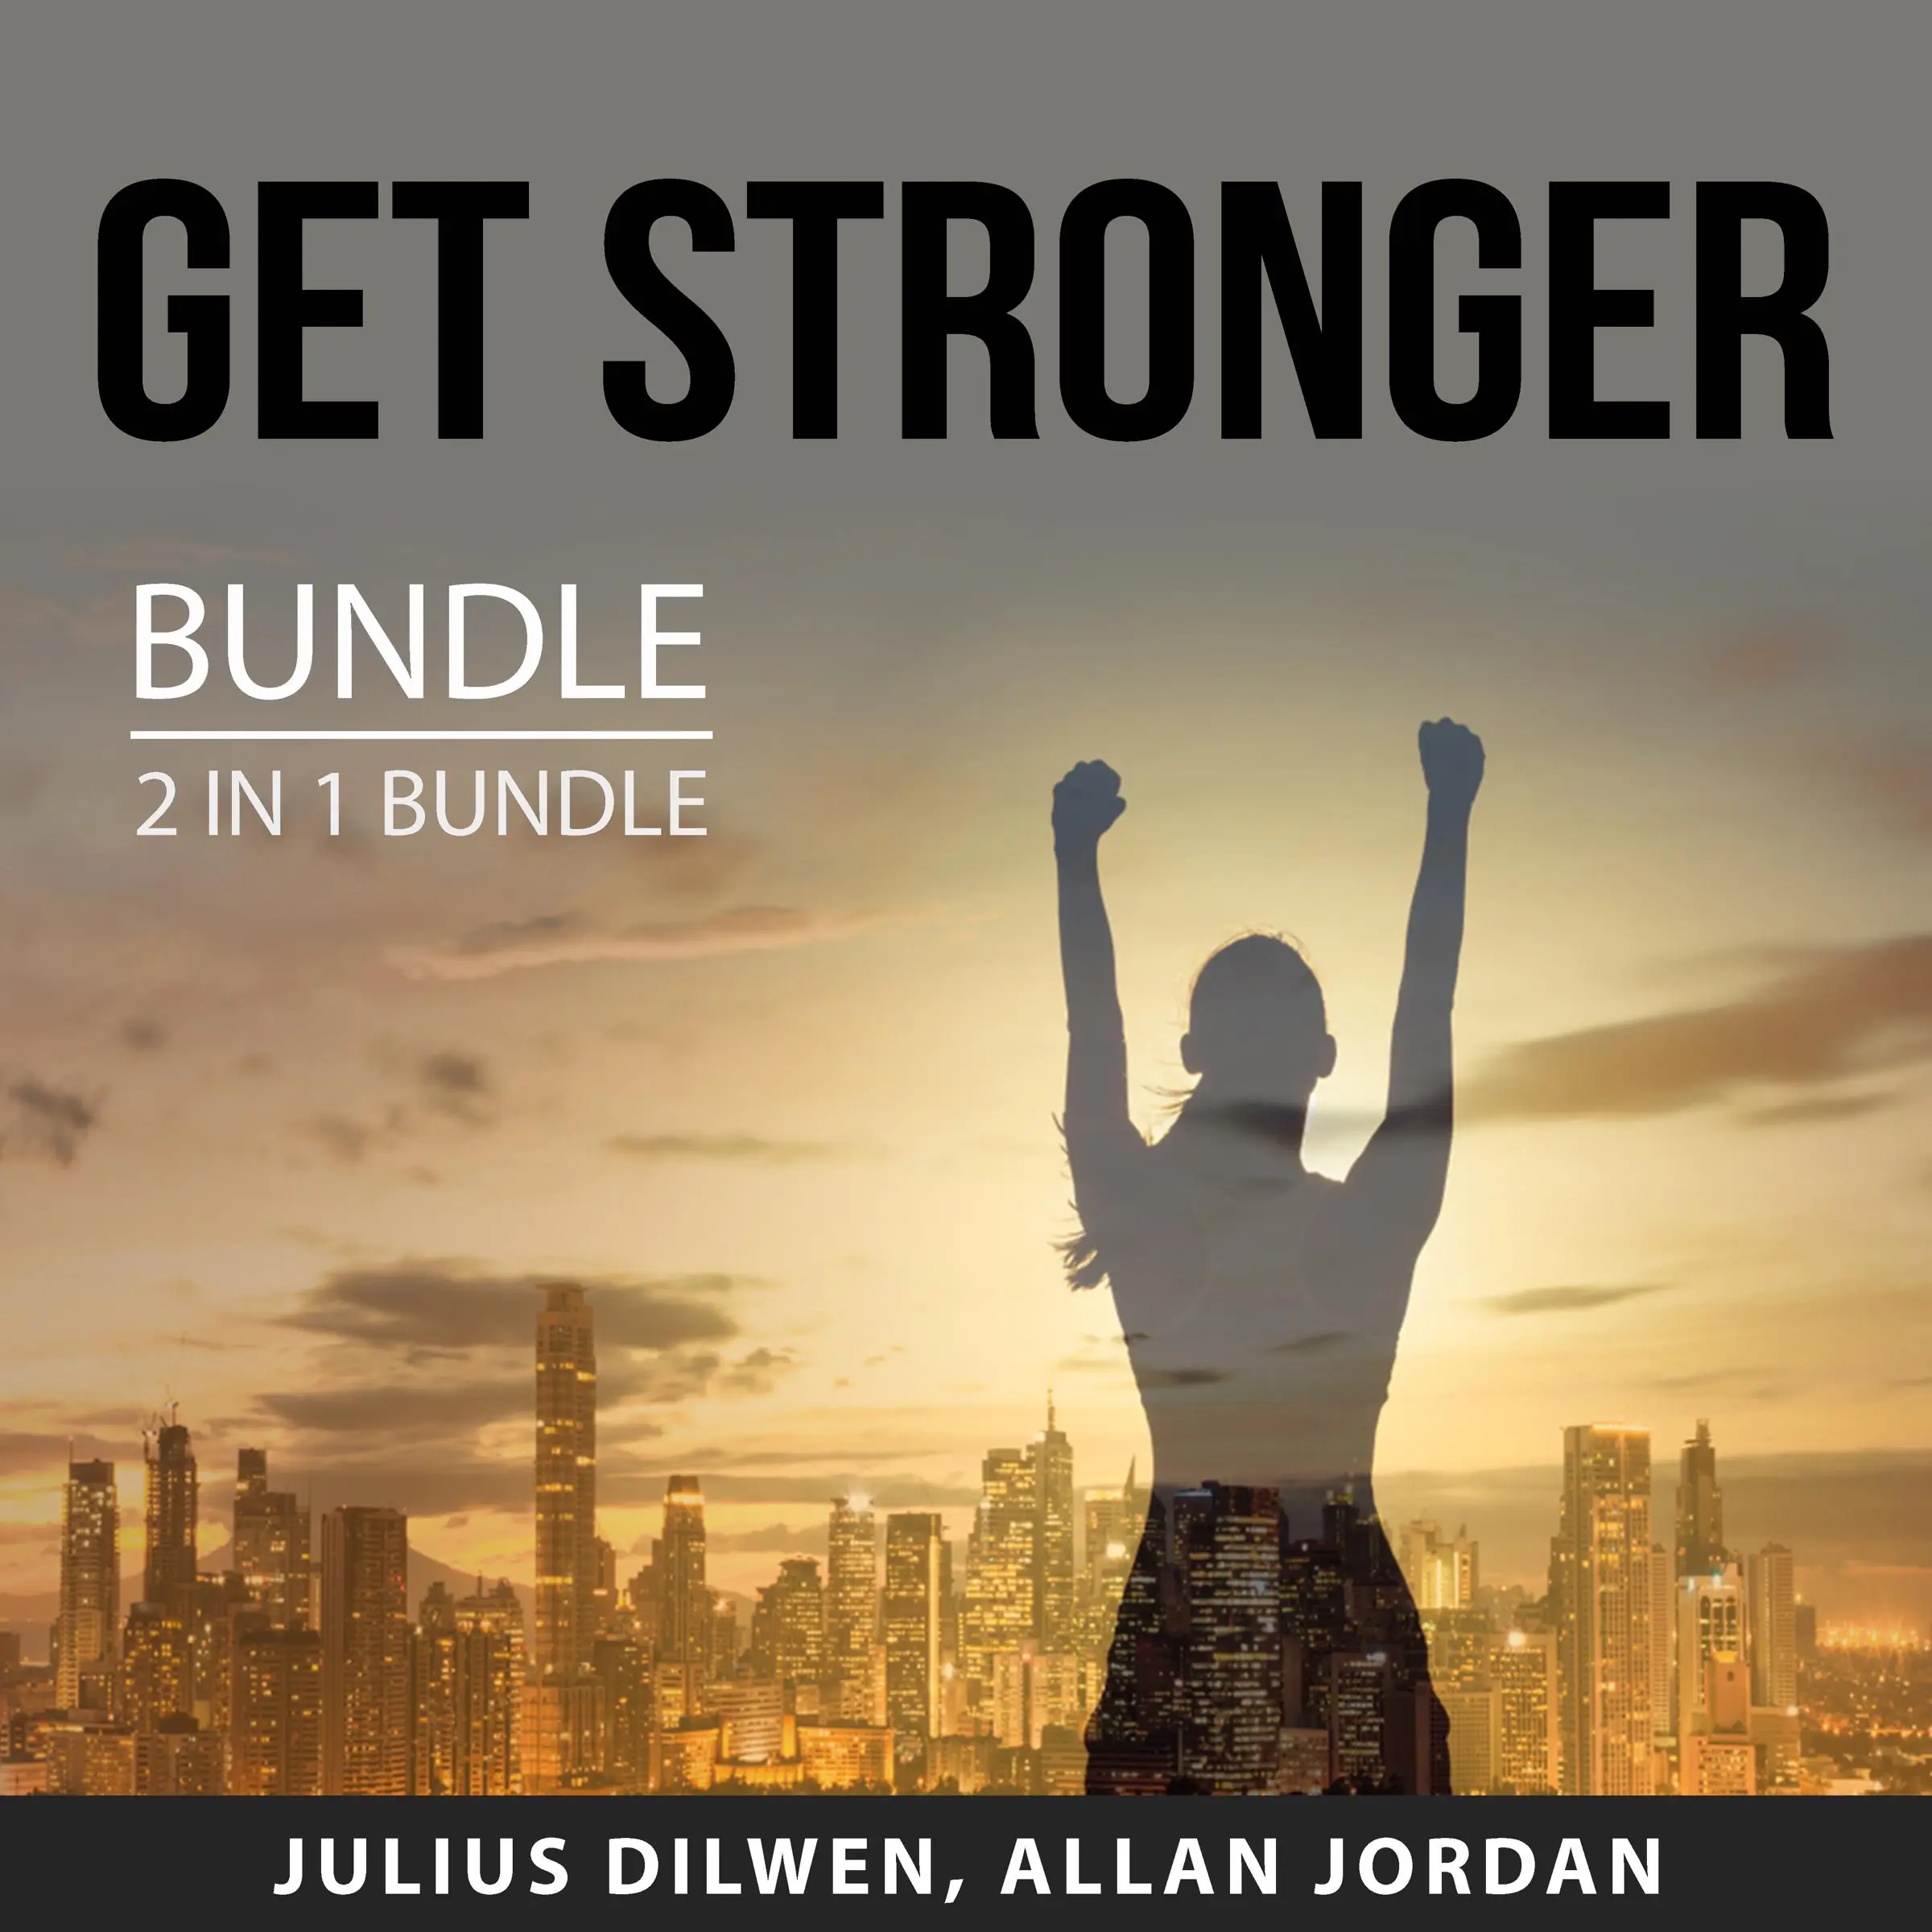 Get Stronger Bundle, 2 in 1 Bundle: Weight Lifting and Growing Strong Audiobook by and Allan Jordan